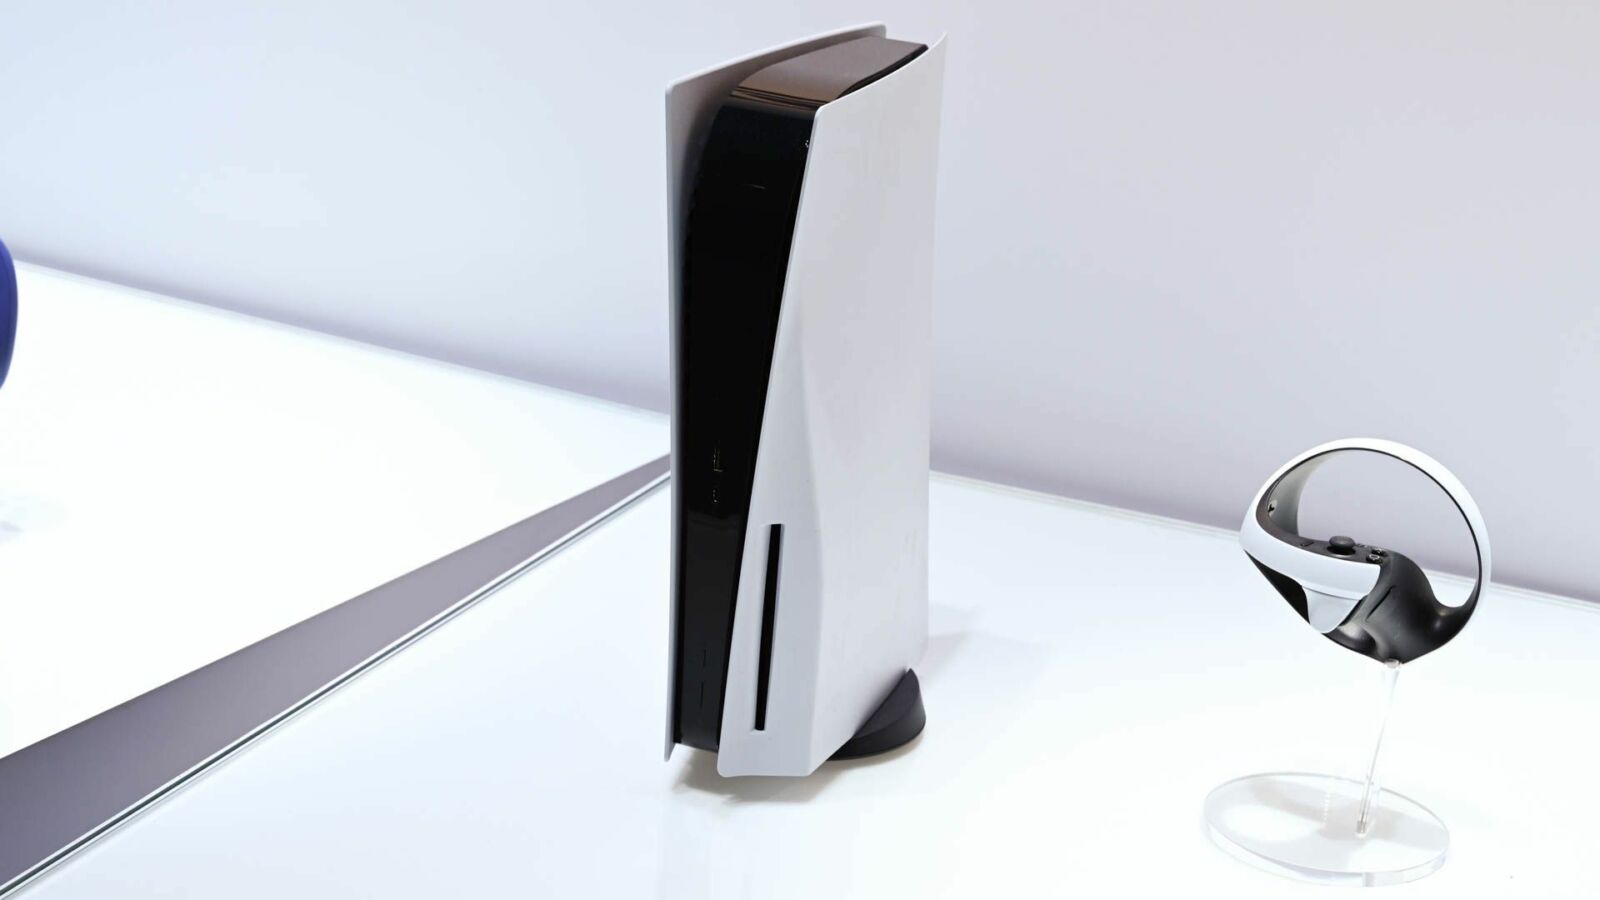 A PlayStation 5 console on a white table.